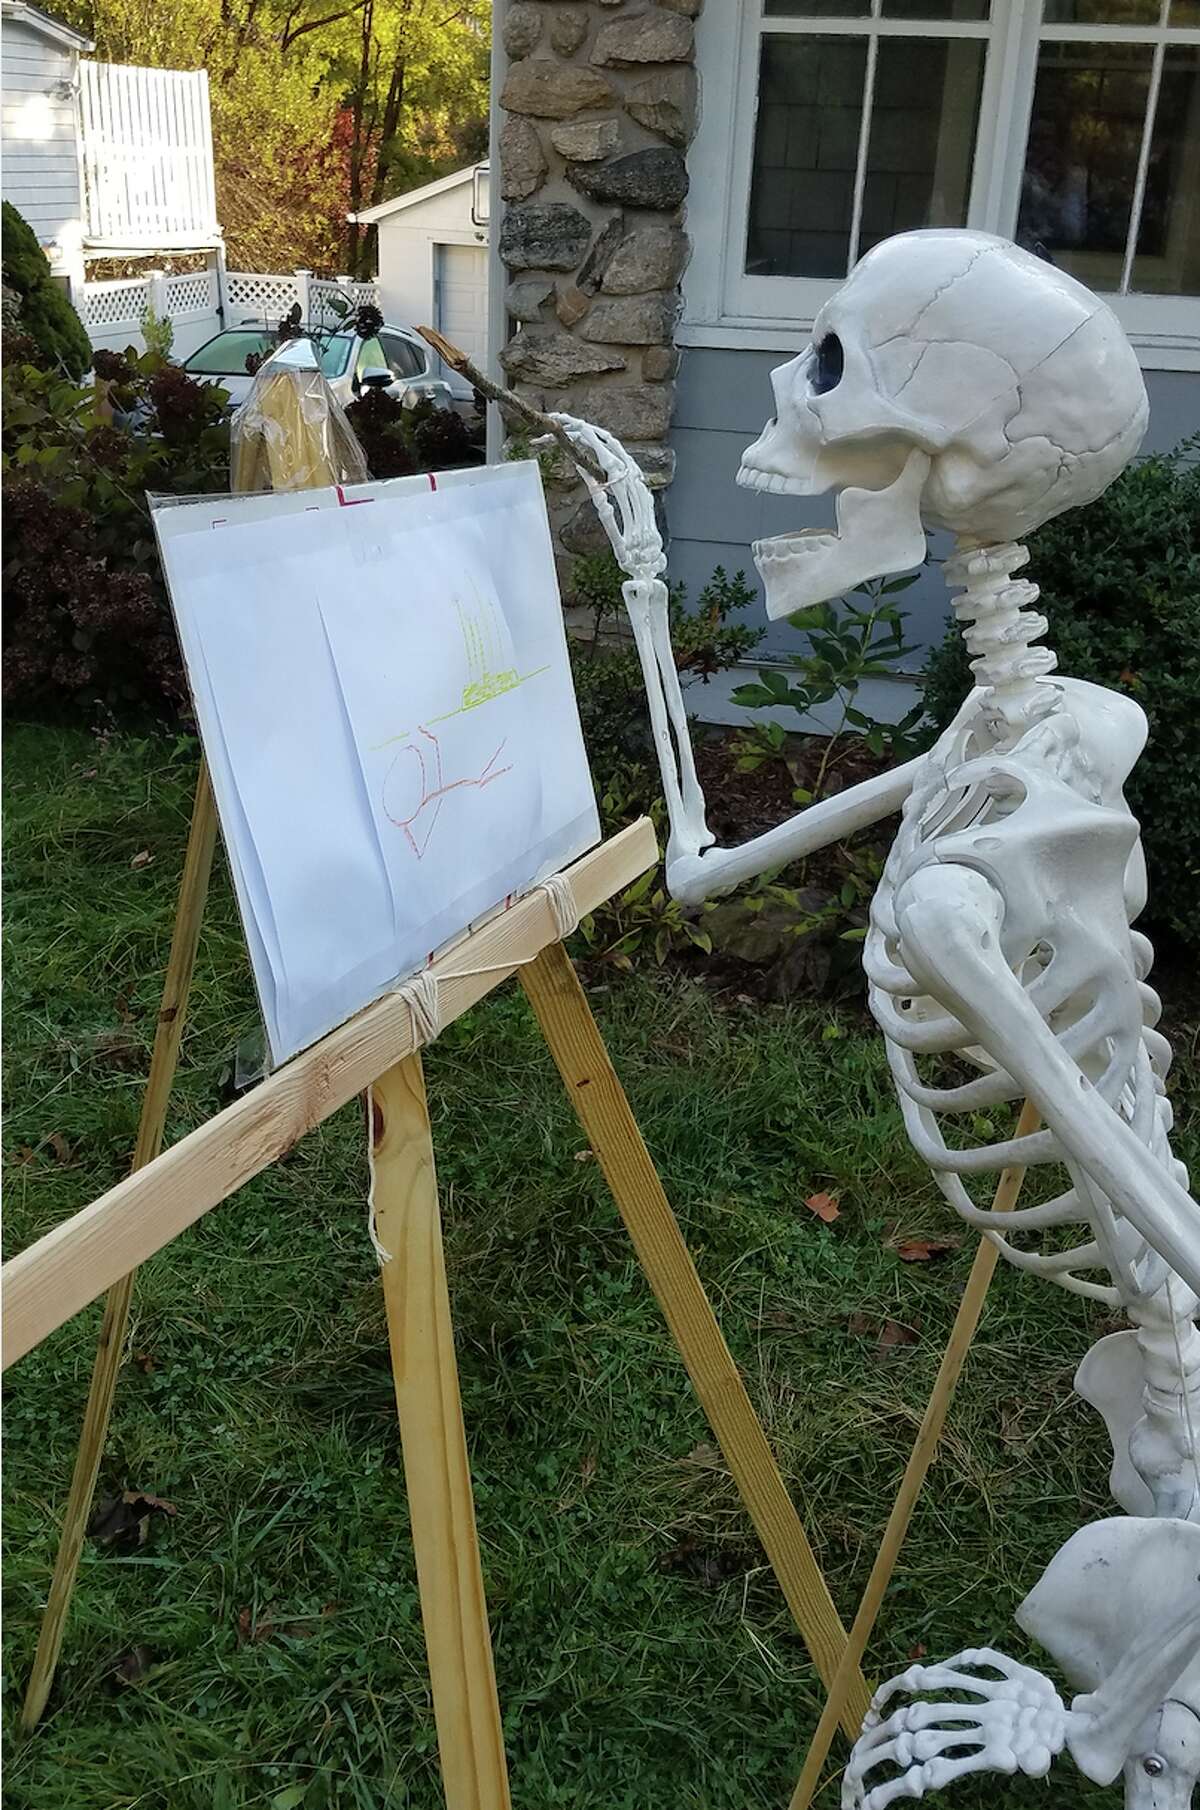 The skeletons have been seen sword fighting from atop their “horses,” sitting around a “campfire,” and “fishing” in a kiddy pool that belongs to the Dummeyers’ 14-month-old daughter. In Mike Dummeyer’s favorite set-up, one skeleton spent the day giving the other a haircut.  